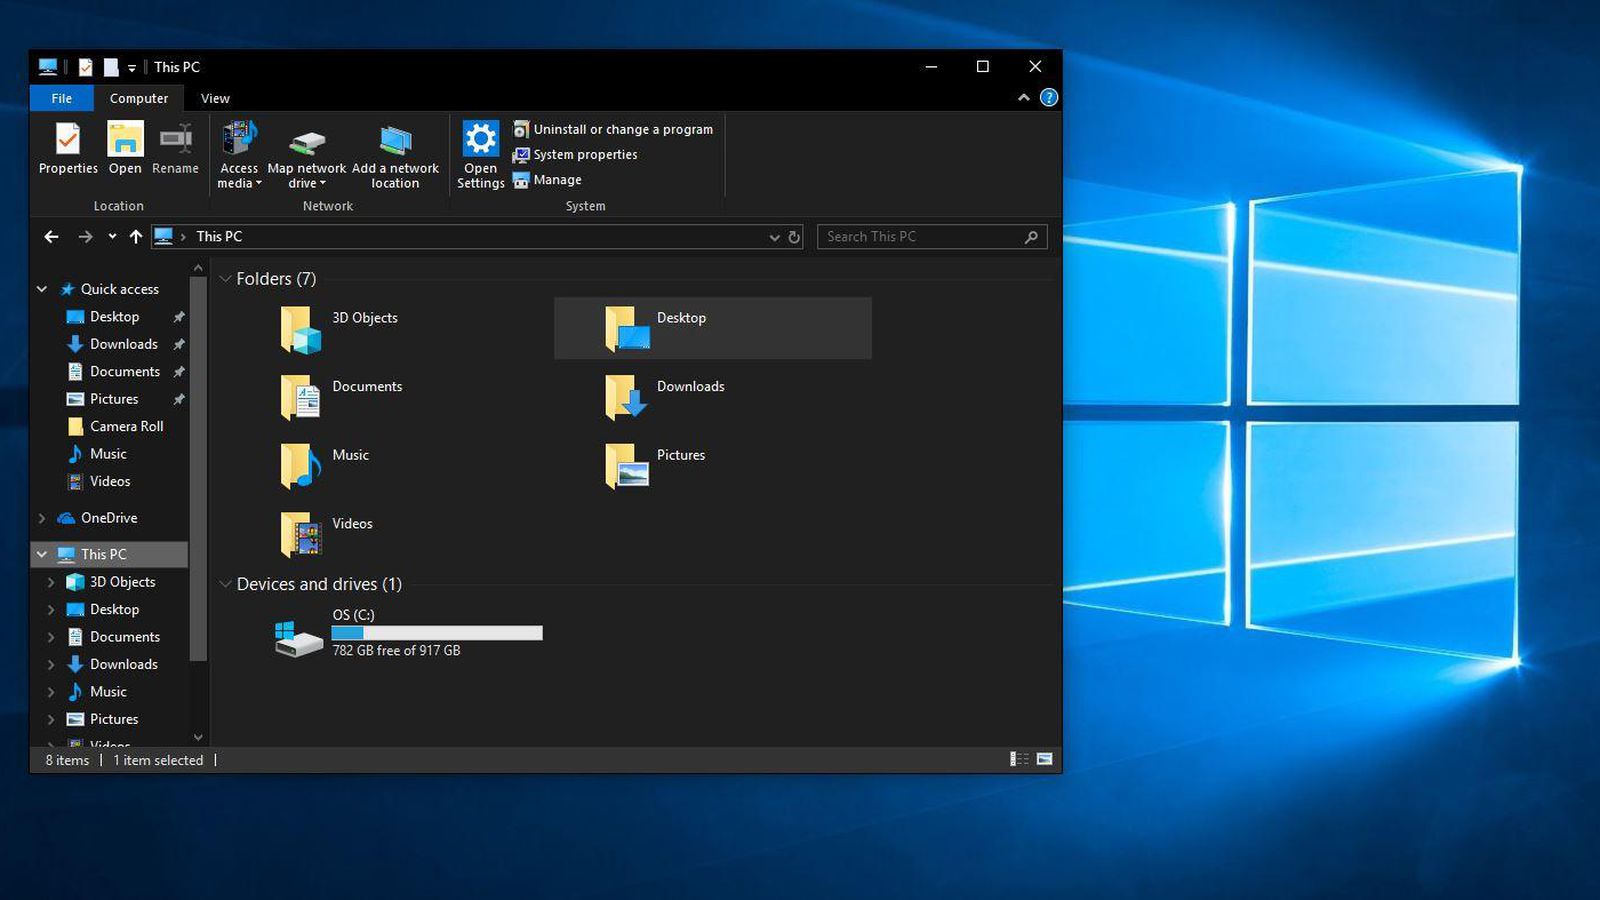 Now everyone can download the Windows 10 October 2018 Update